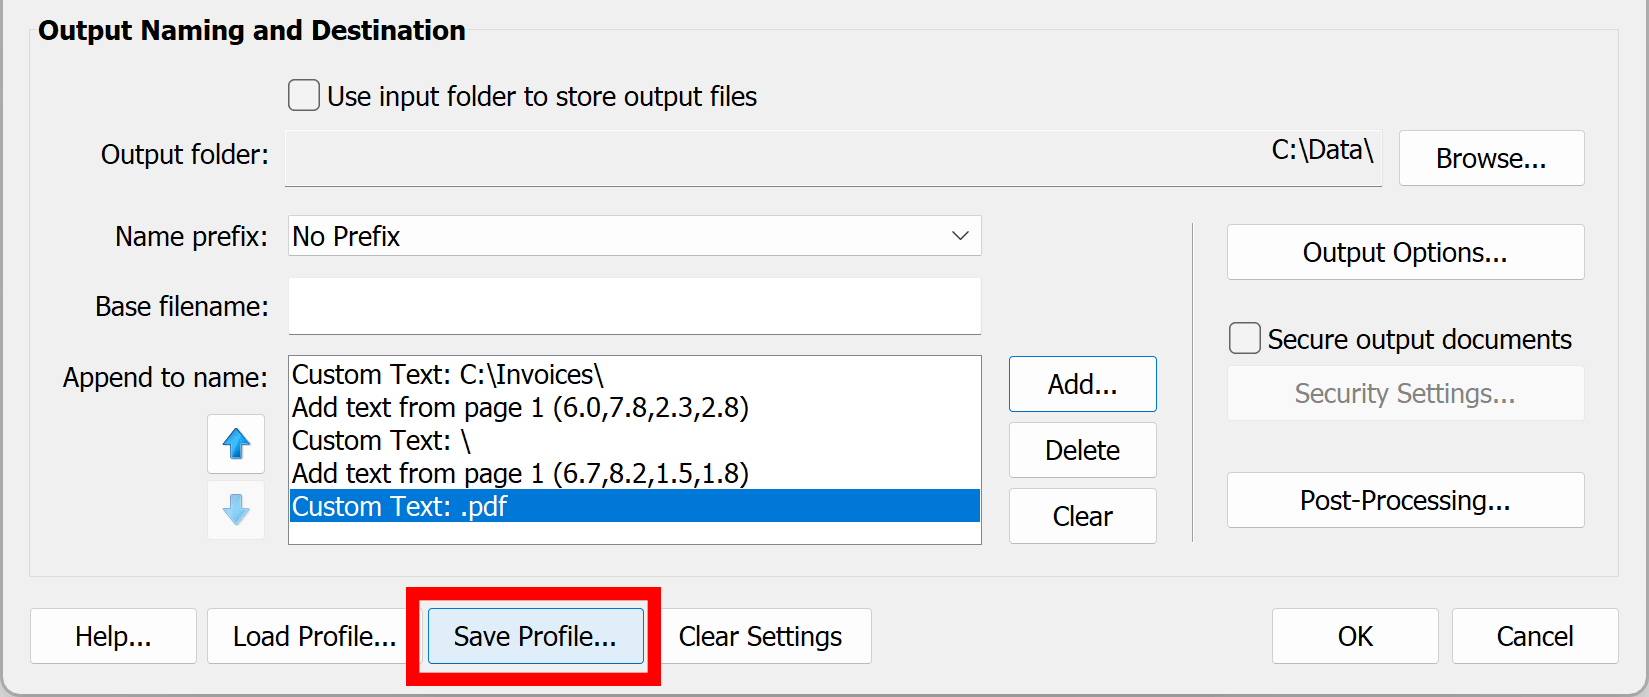 Optionally, press Save Profile button to save settings into a file